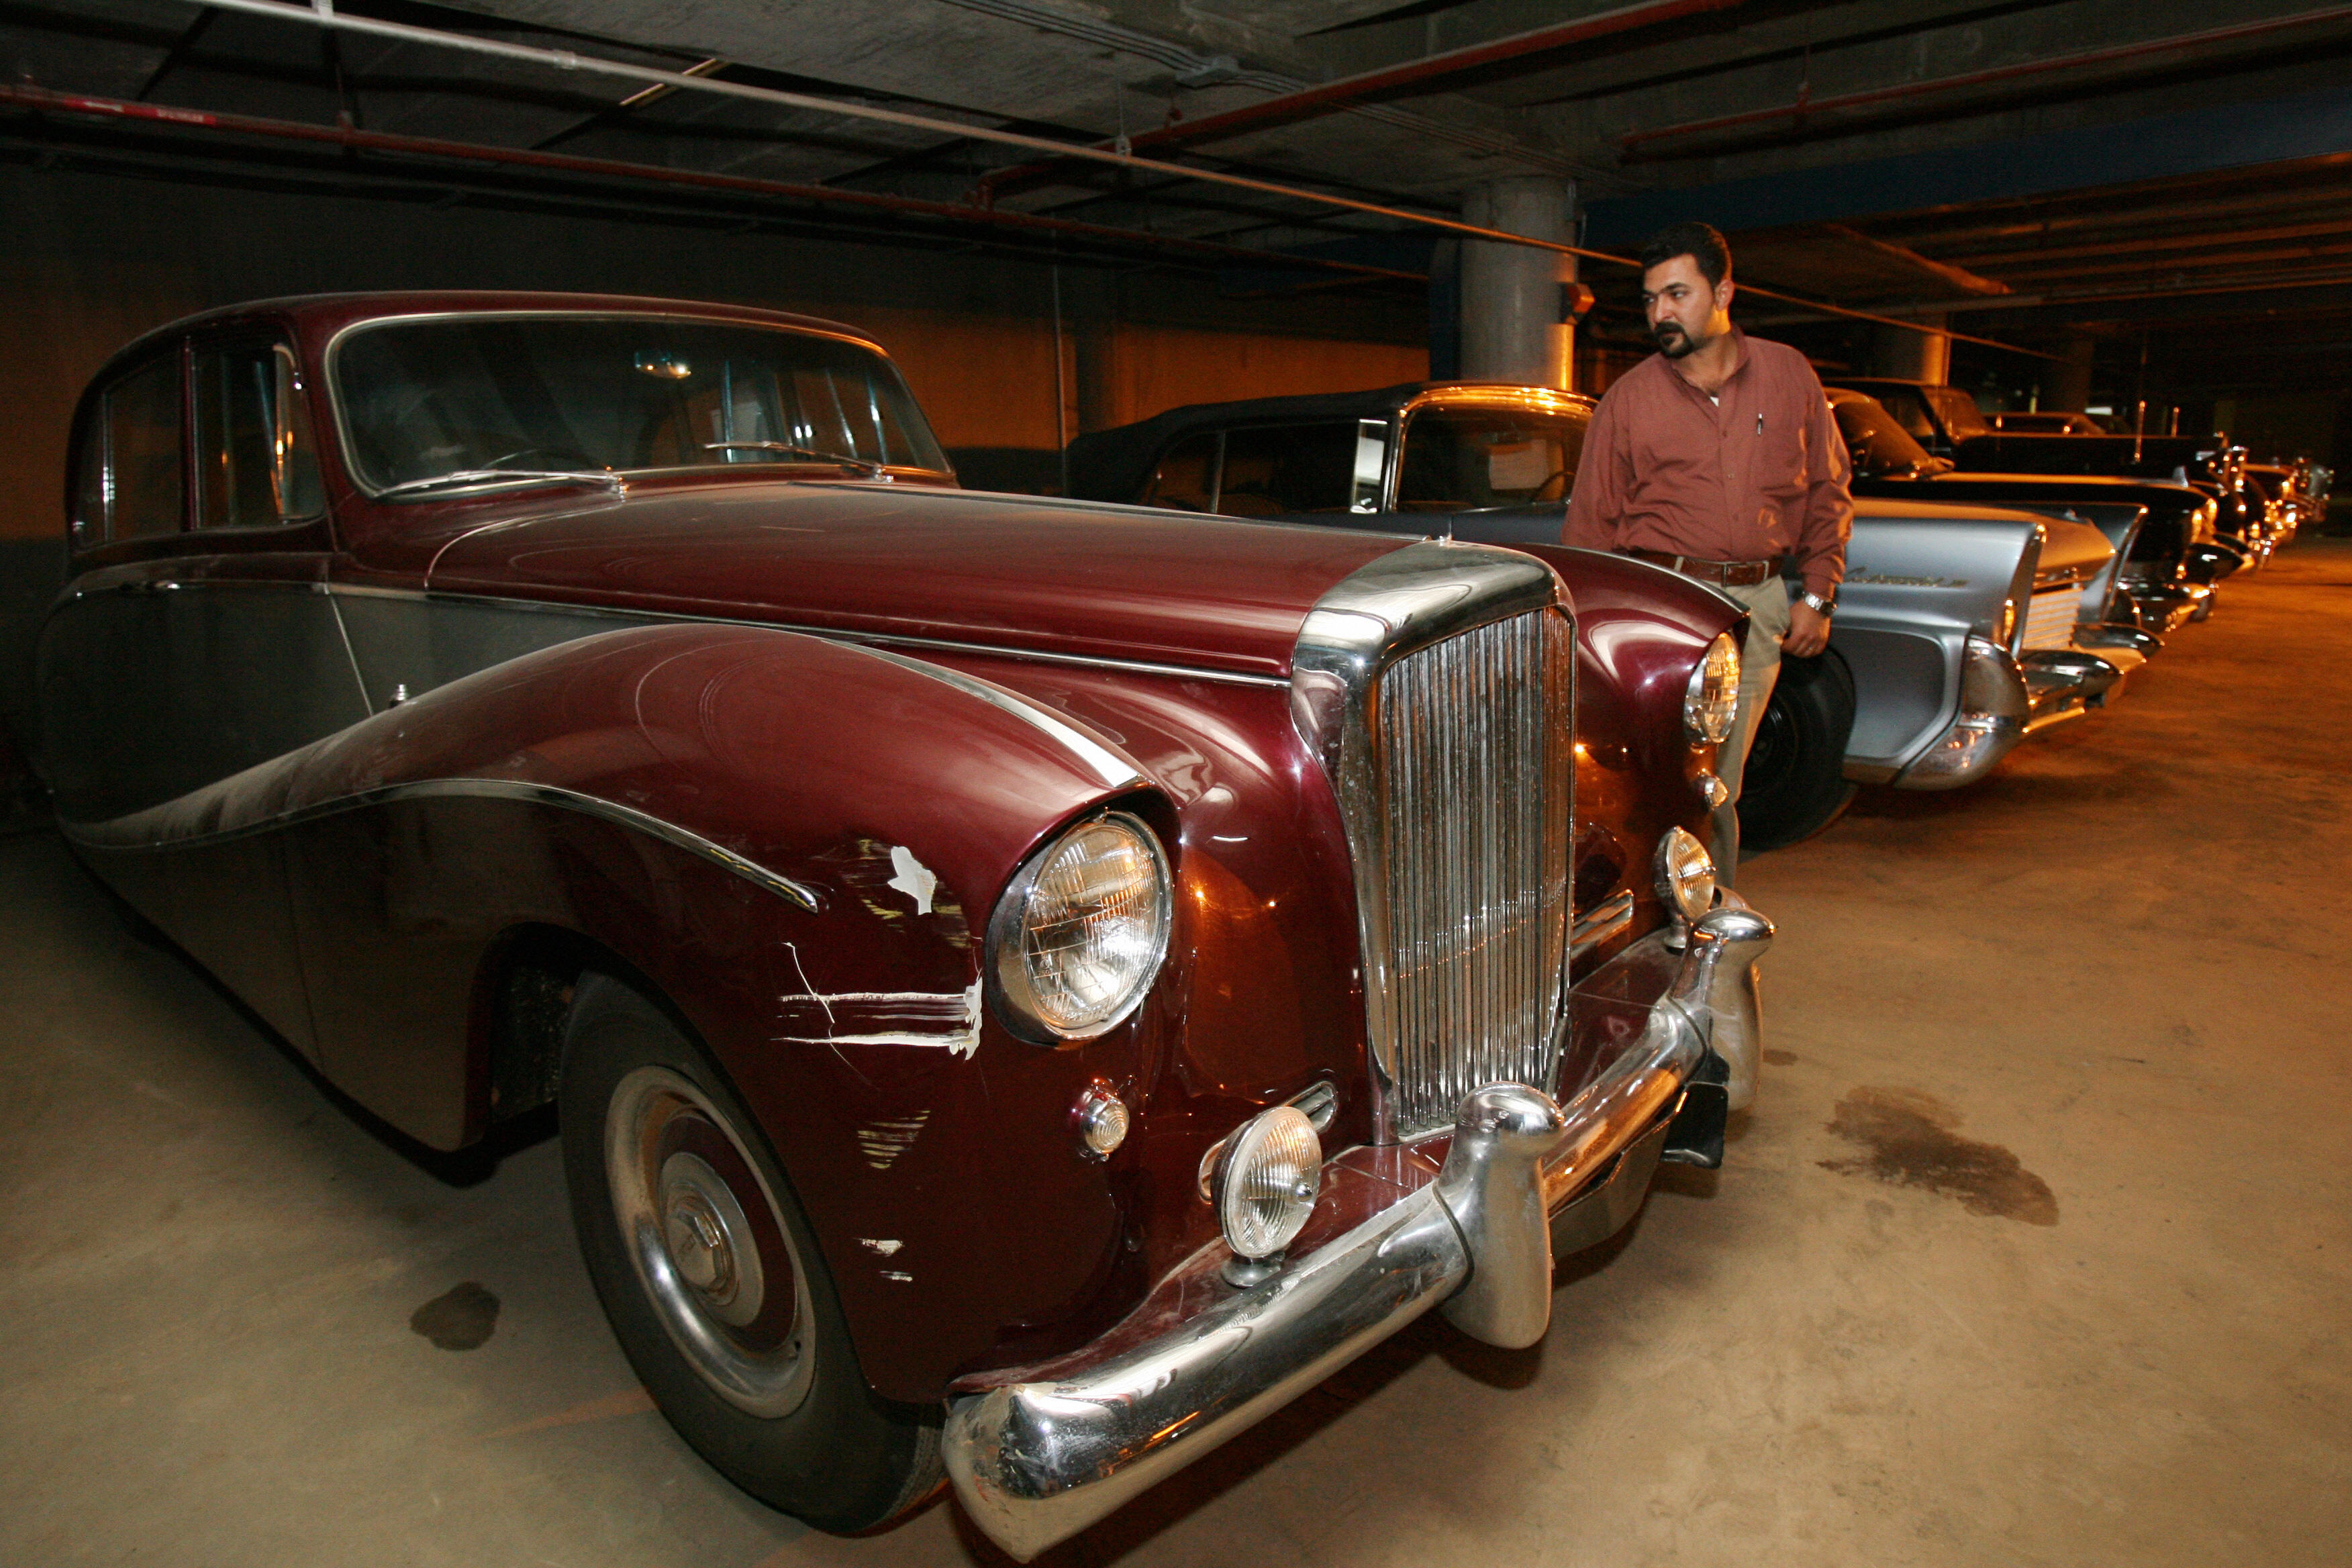 Optimism in Iraq fuels revived interest in vintage cars